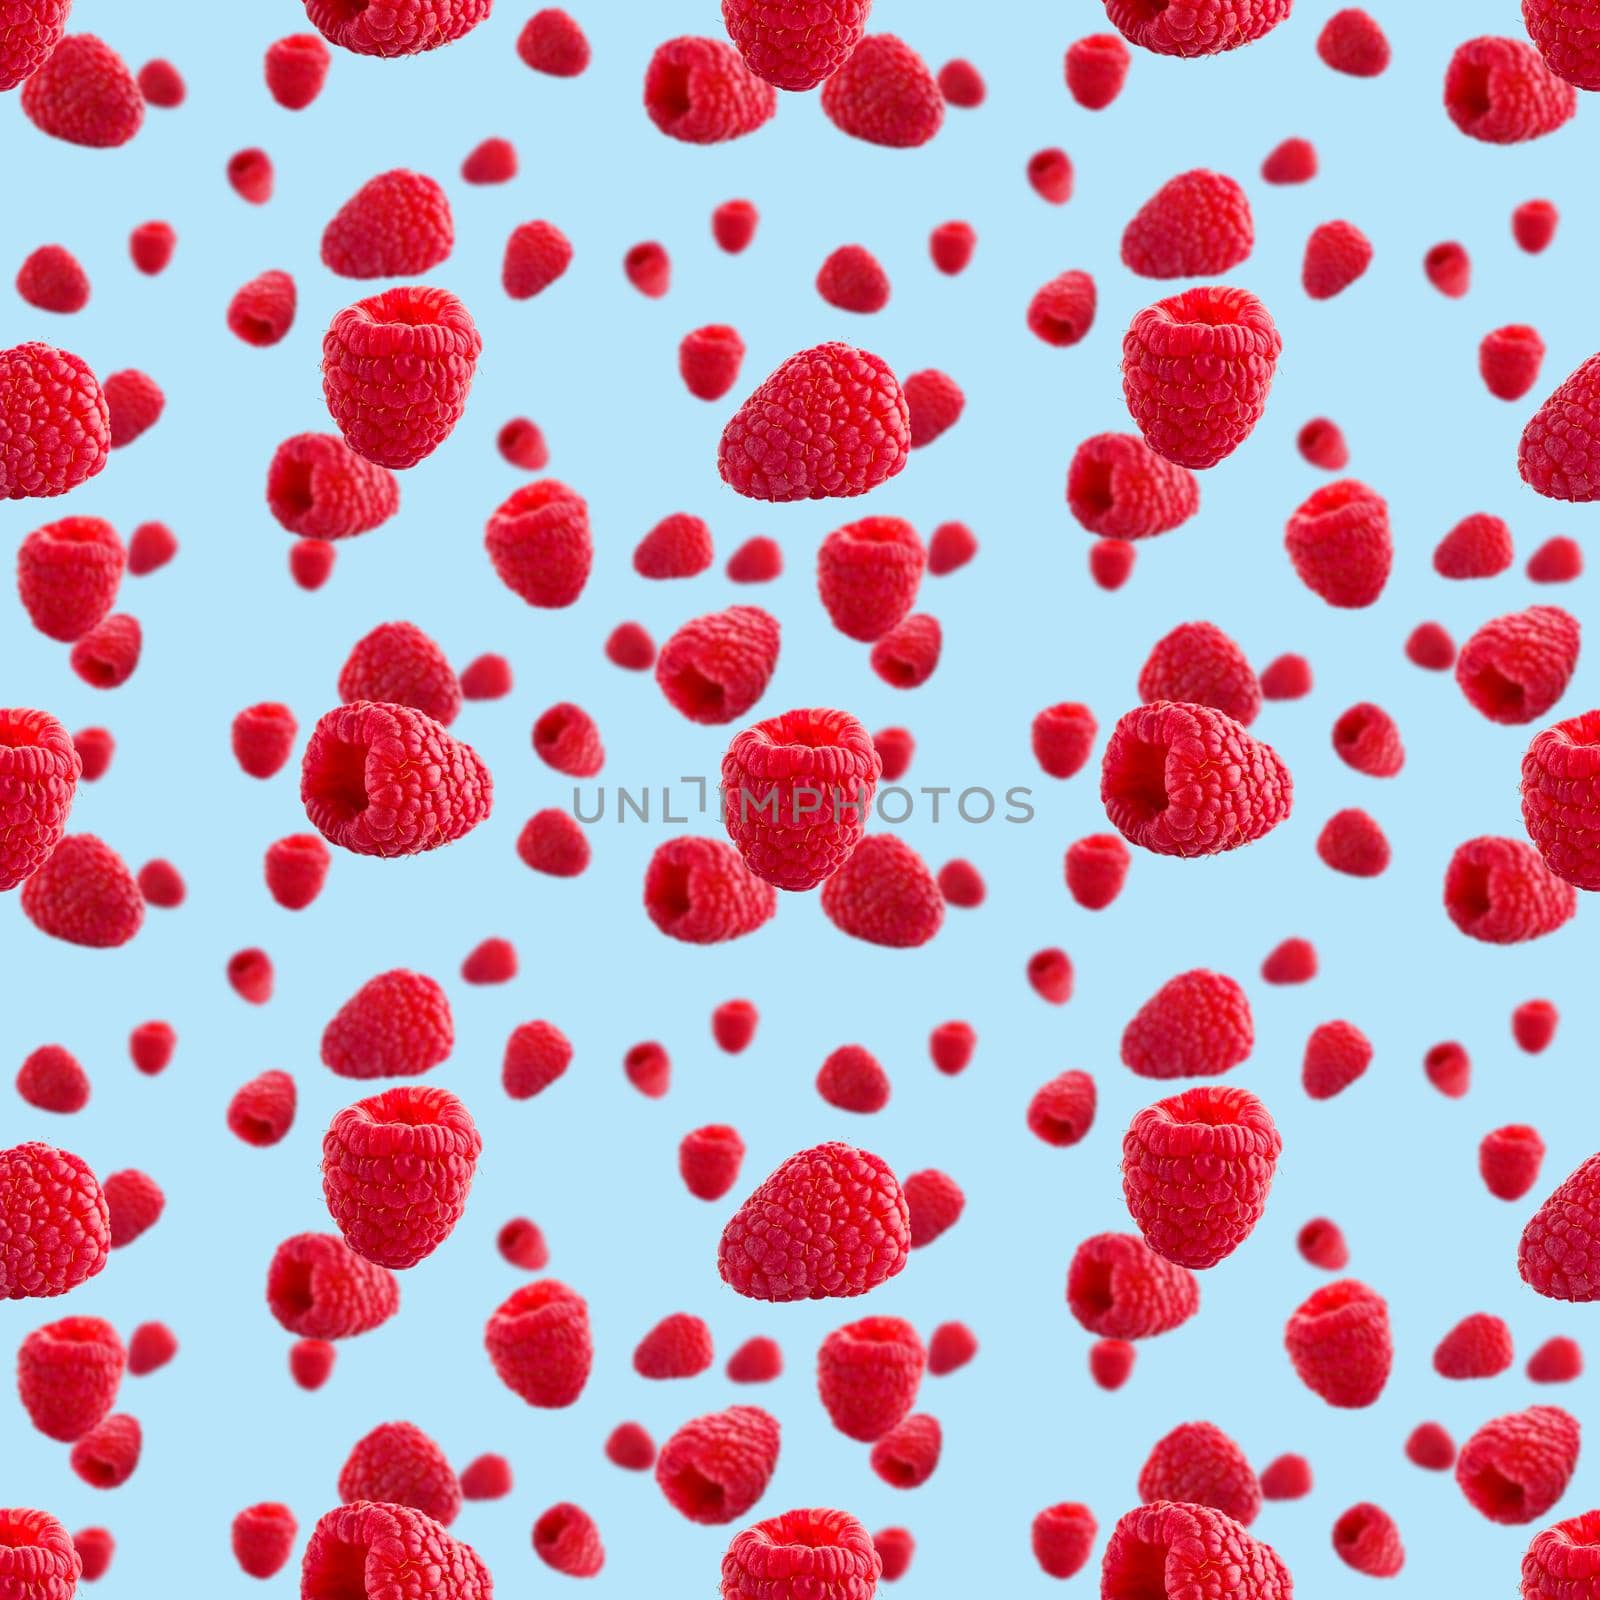 Seamless pattern with ripe raspberry. Berries abstract background. Raspberry pattern for package design with blue background.